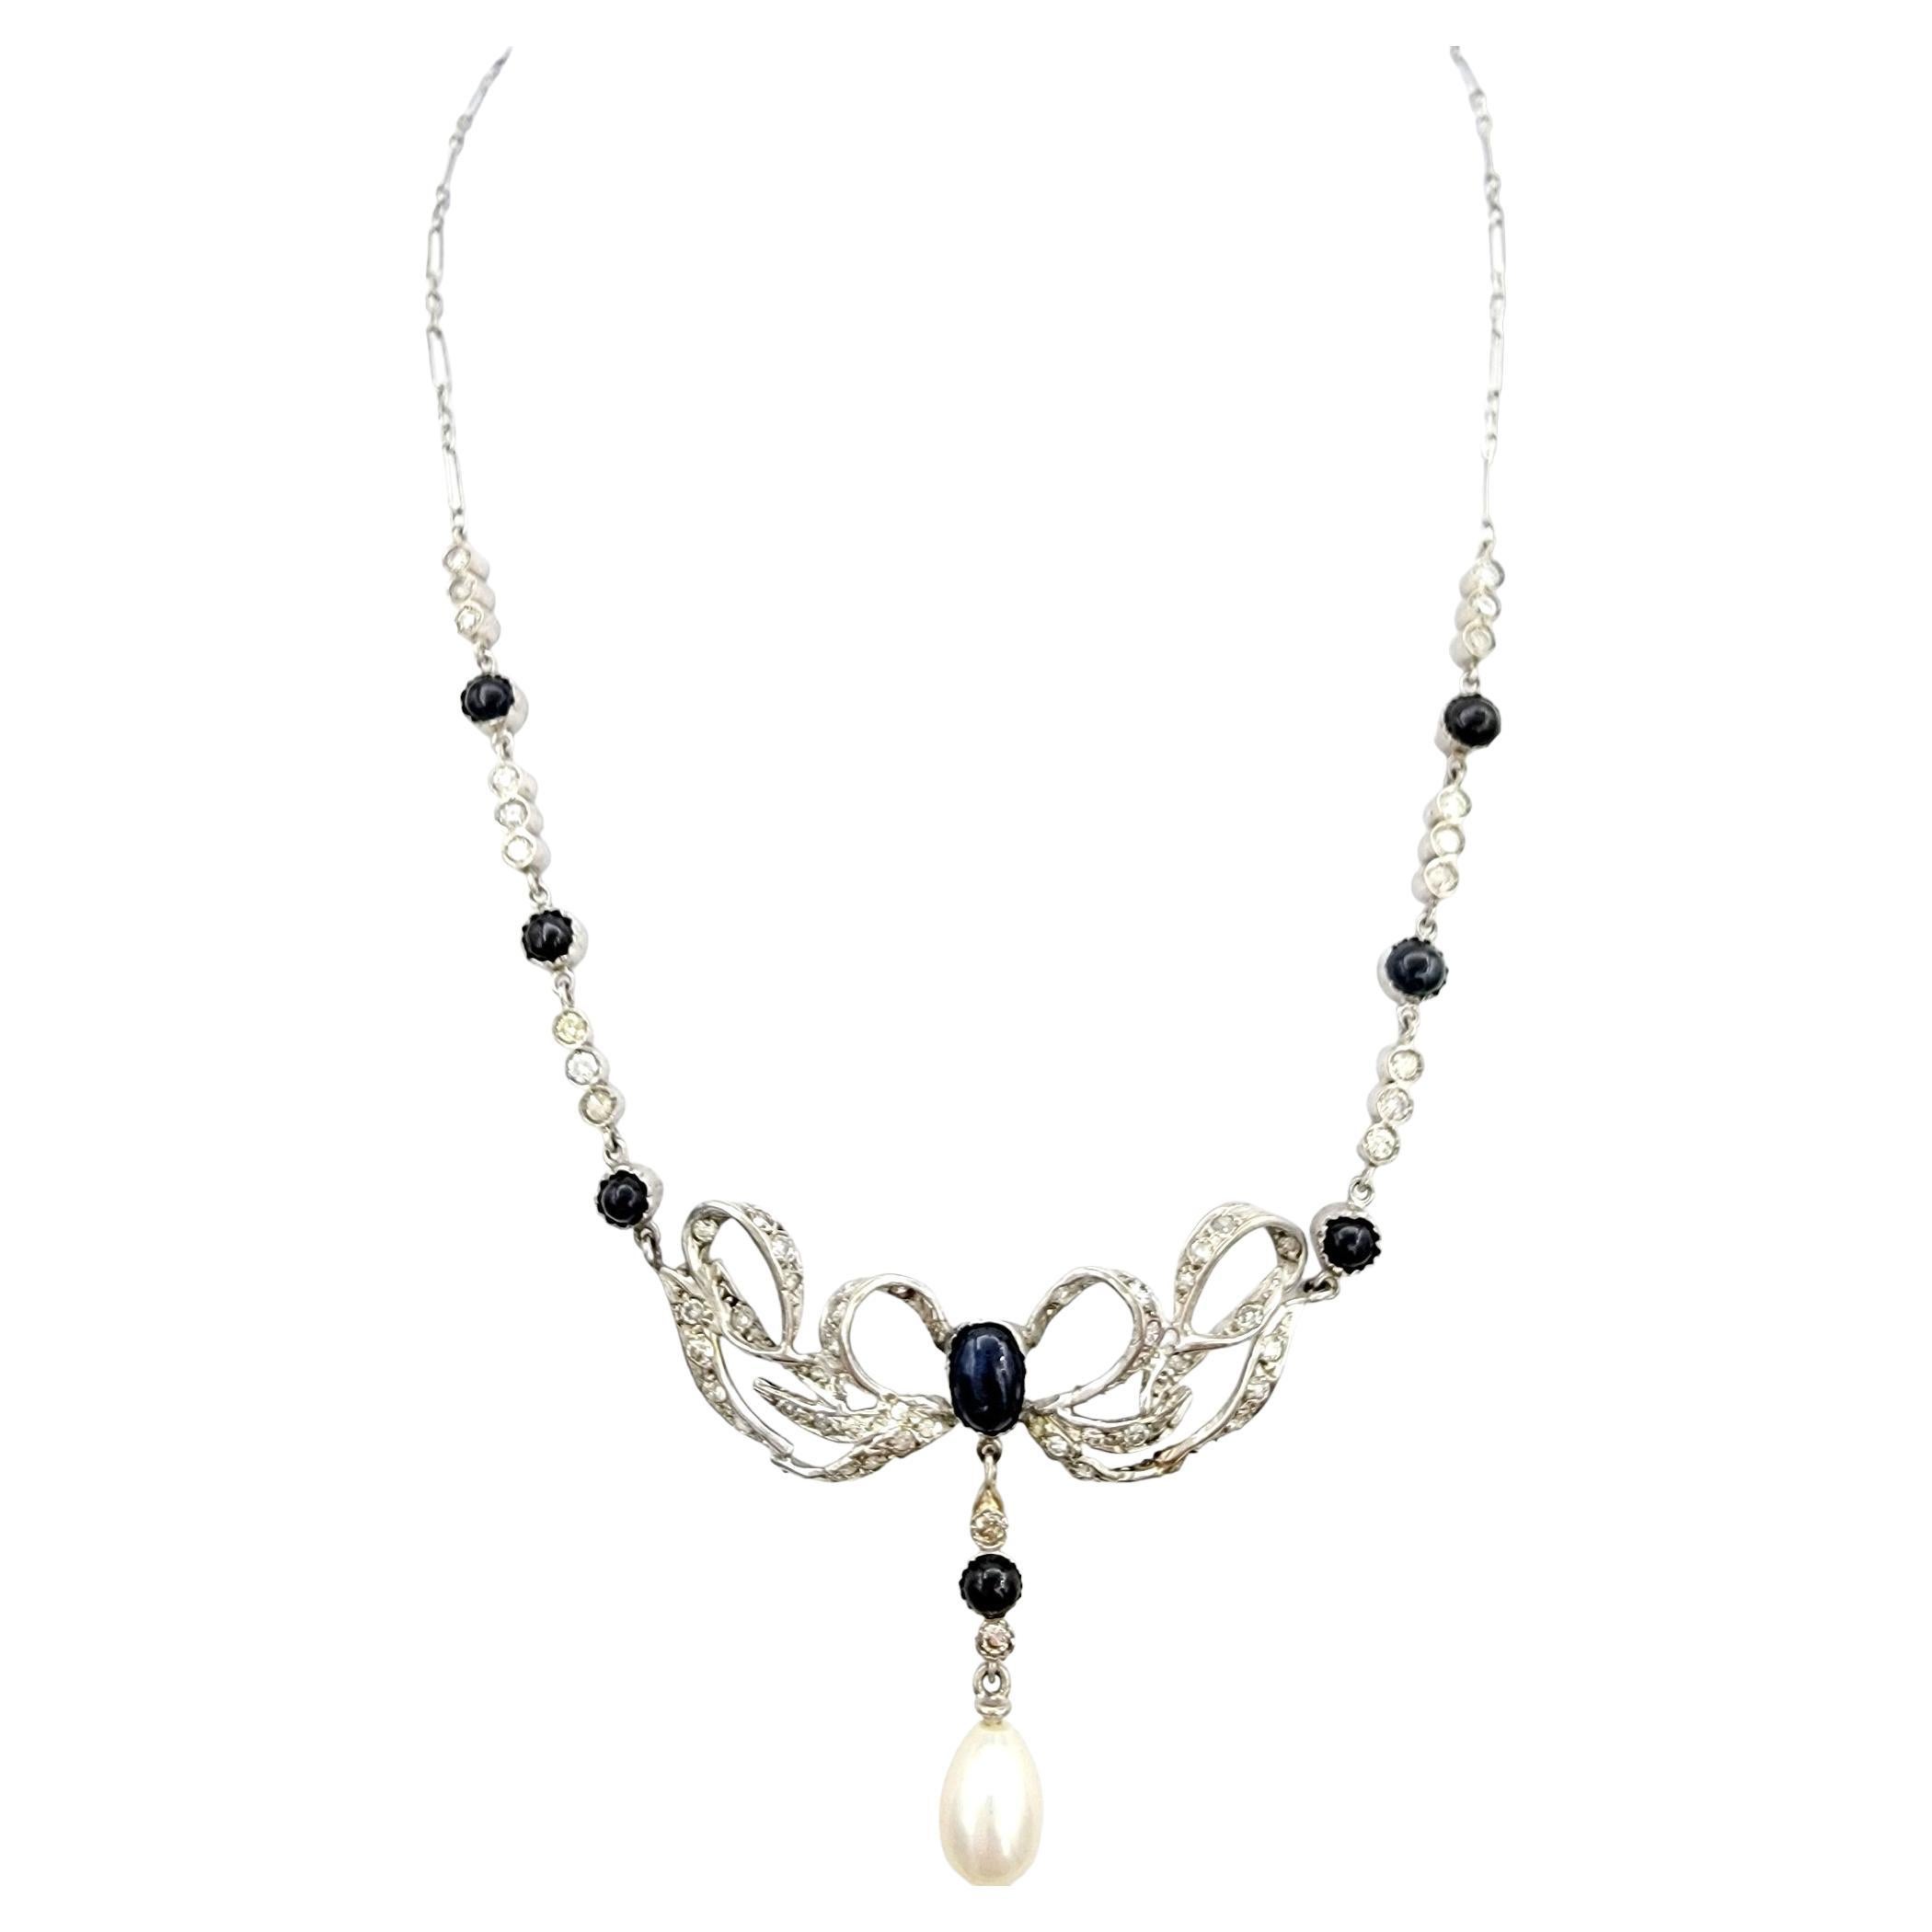 Vintage Diamond, Sapphire and Cultured Pearl Drop Necklace Set in Platinum